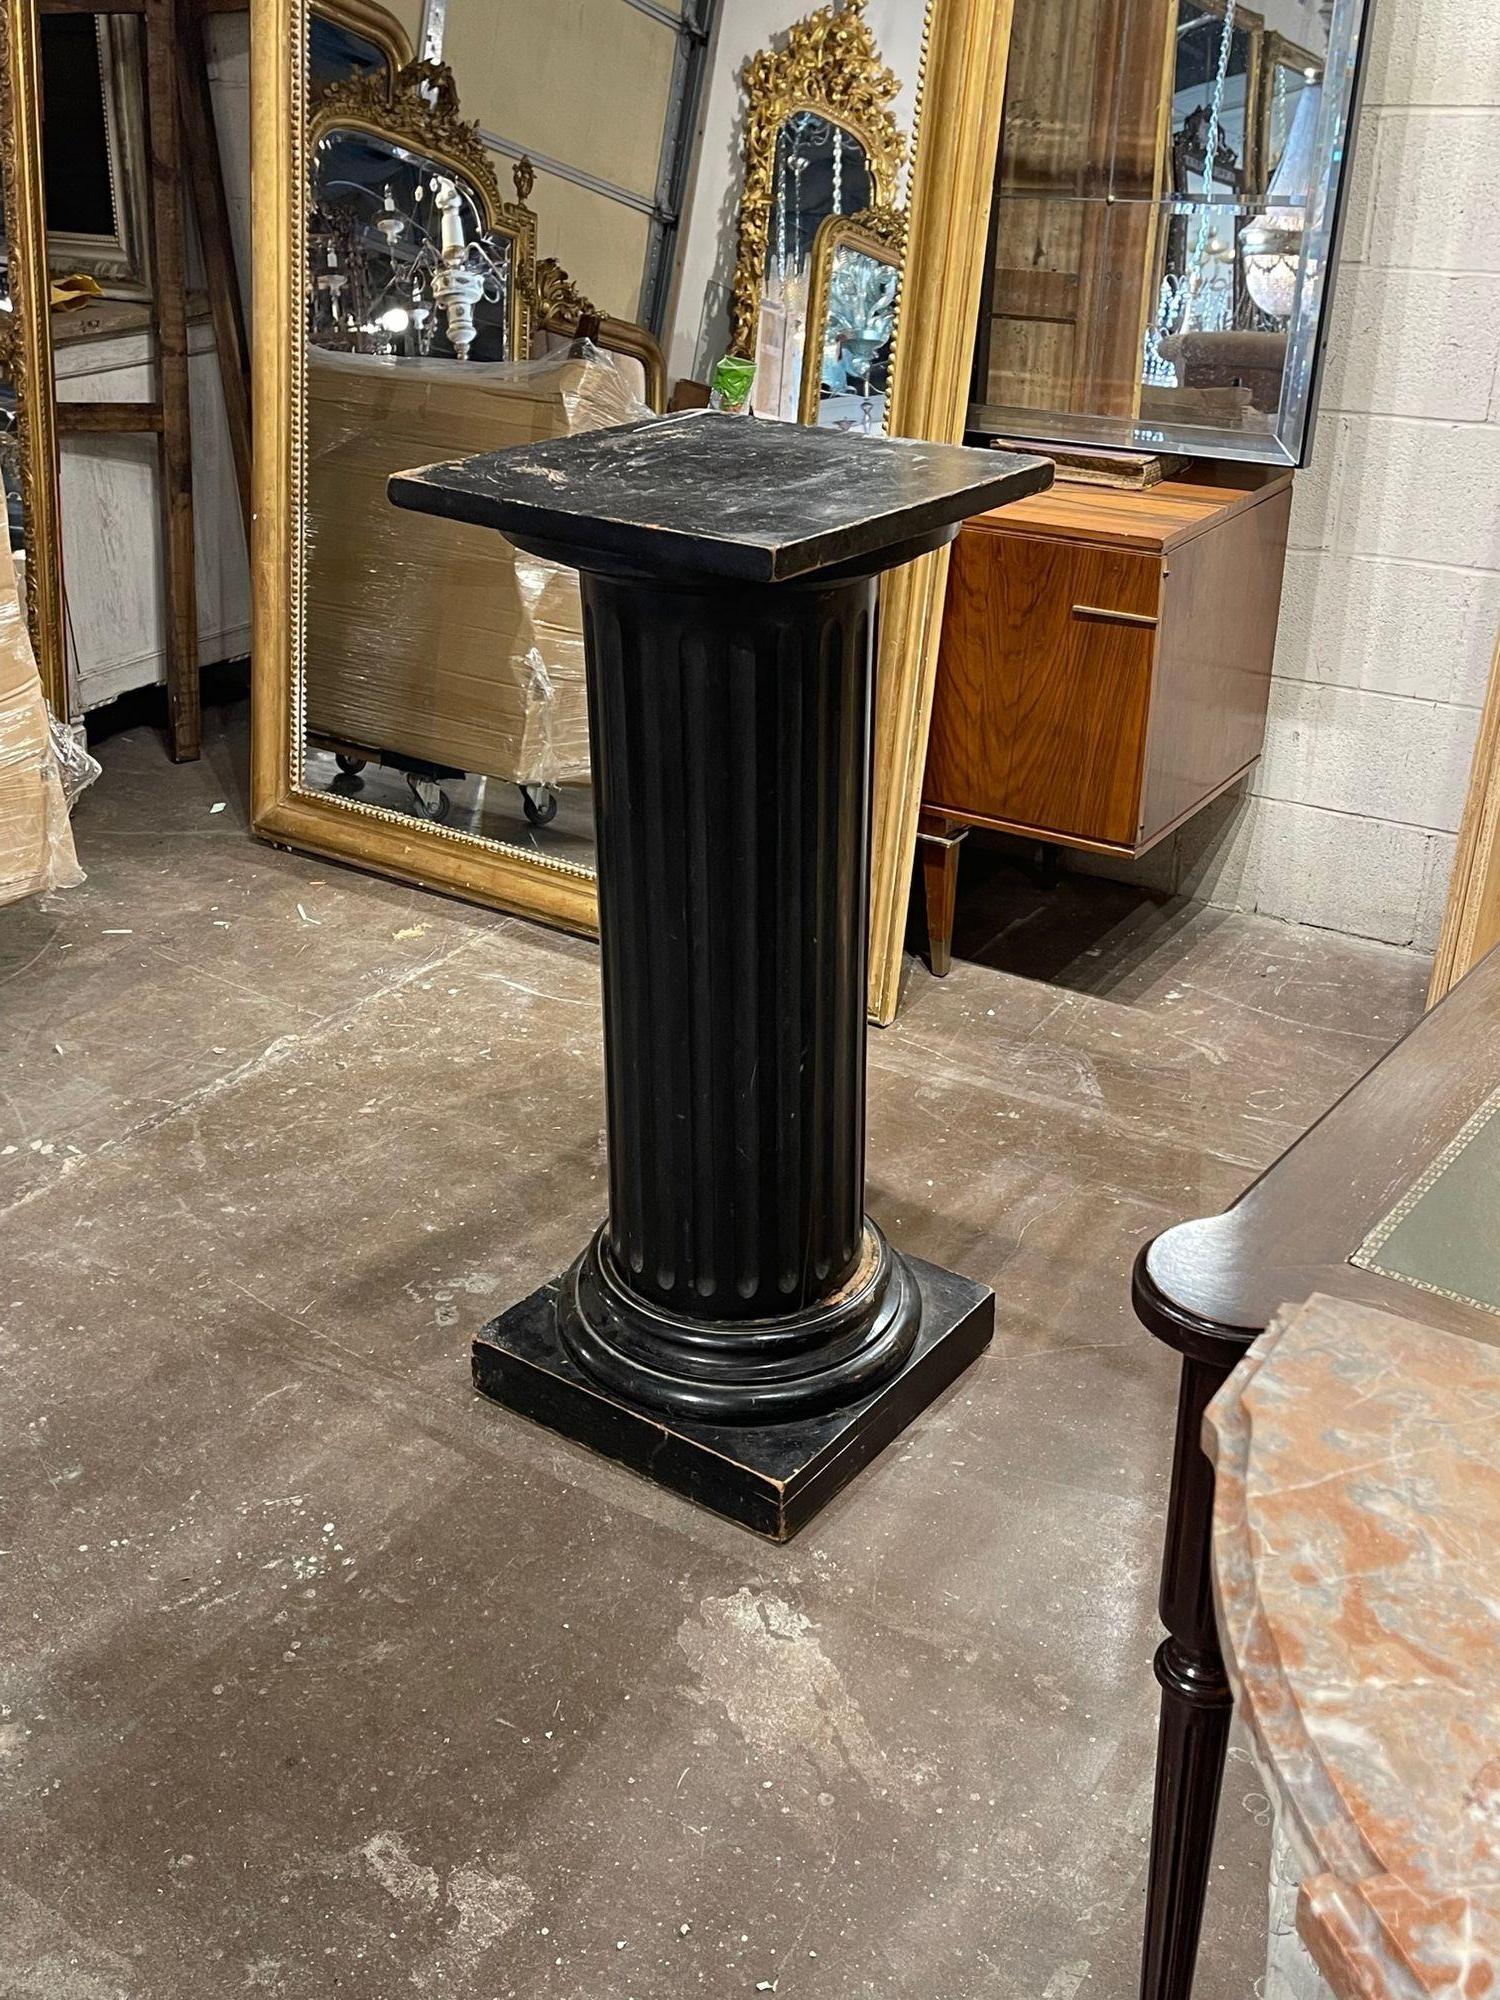 Handsome 19th century French painted wooden pedestal. Beautiful original patina. A great way to display works of art. Nice!